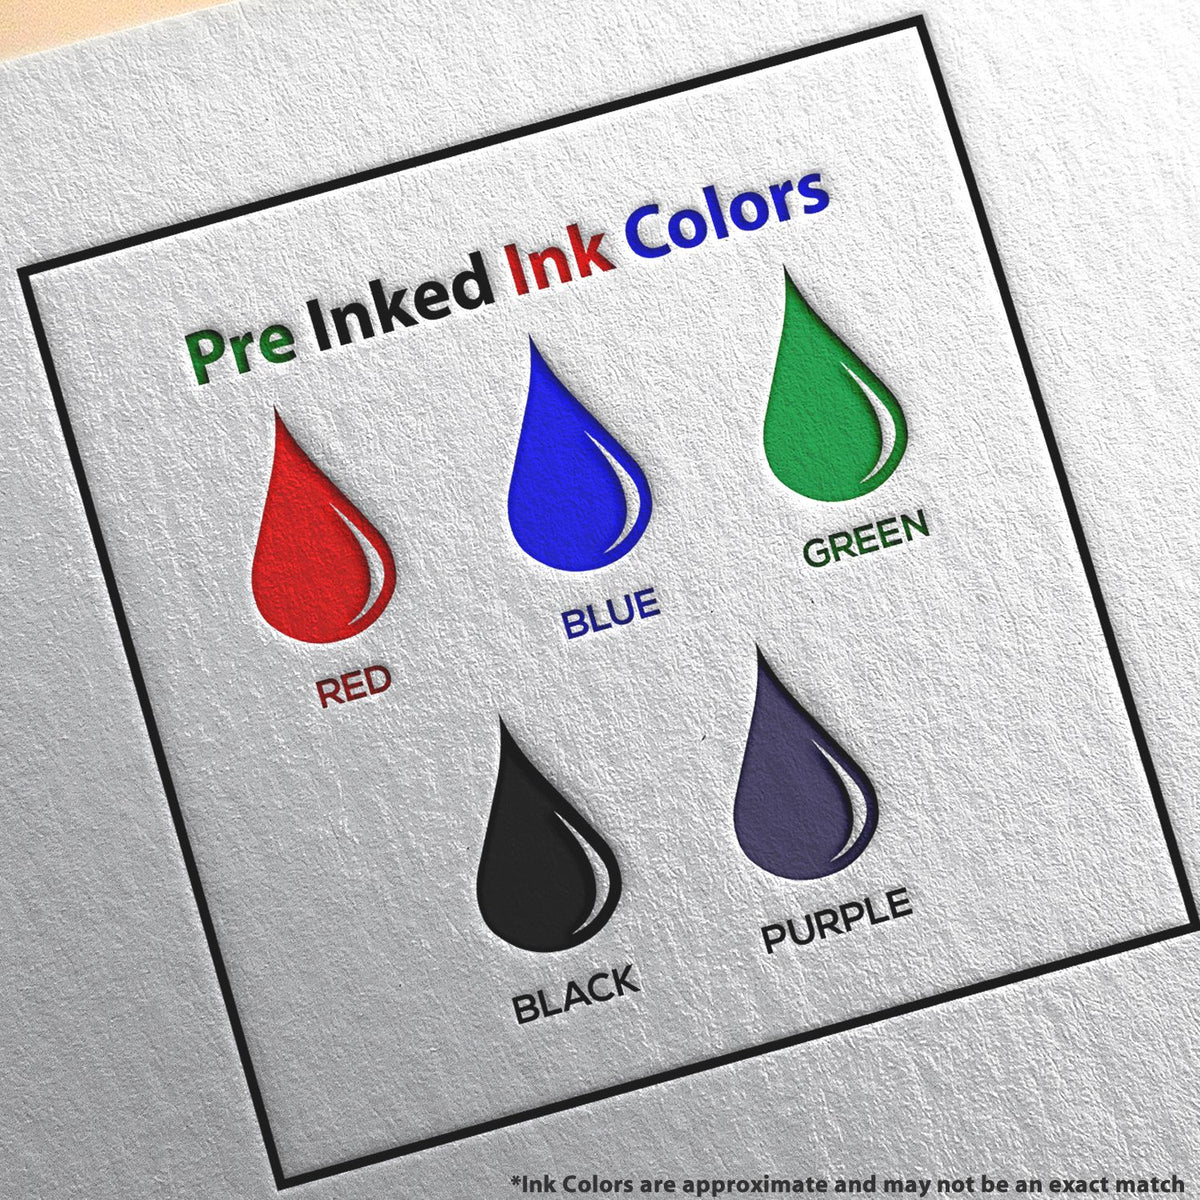 A picture showing the different ink colors or hues available for the Super Slim Michigan Notary Public Stamp product.